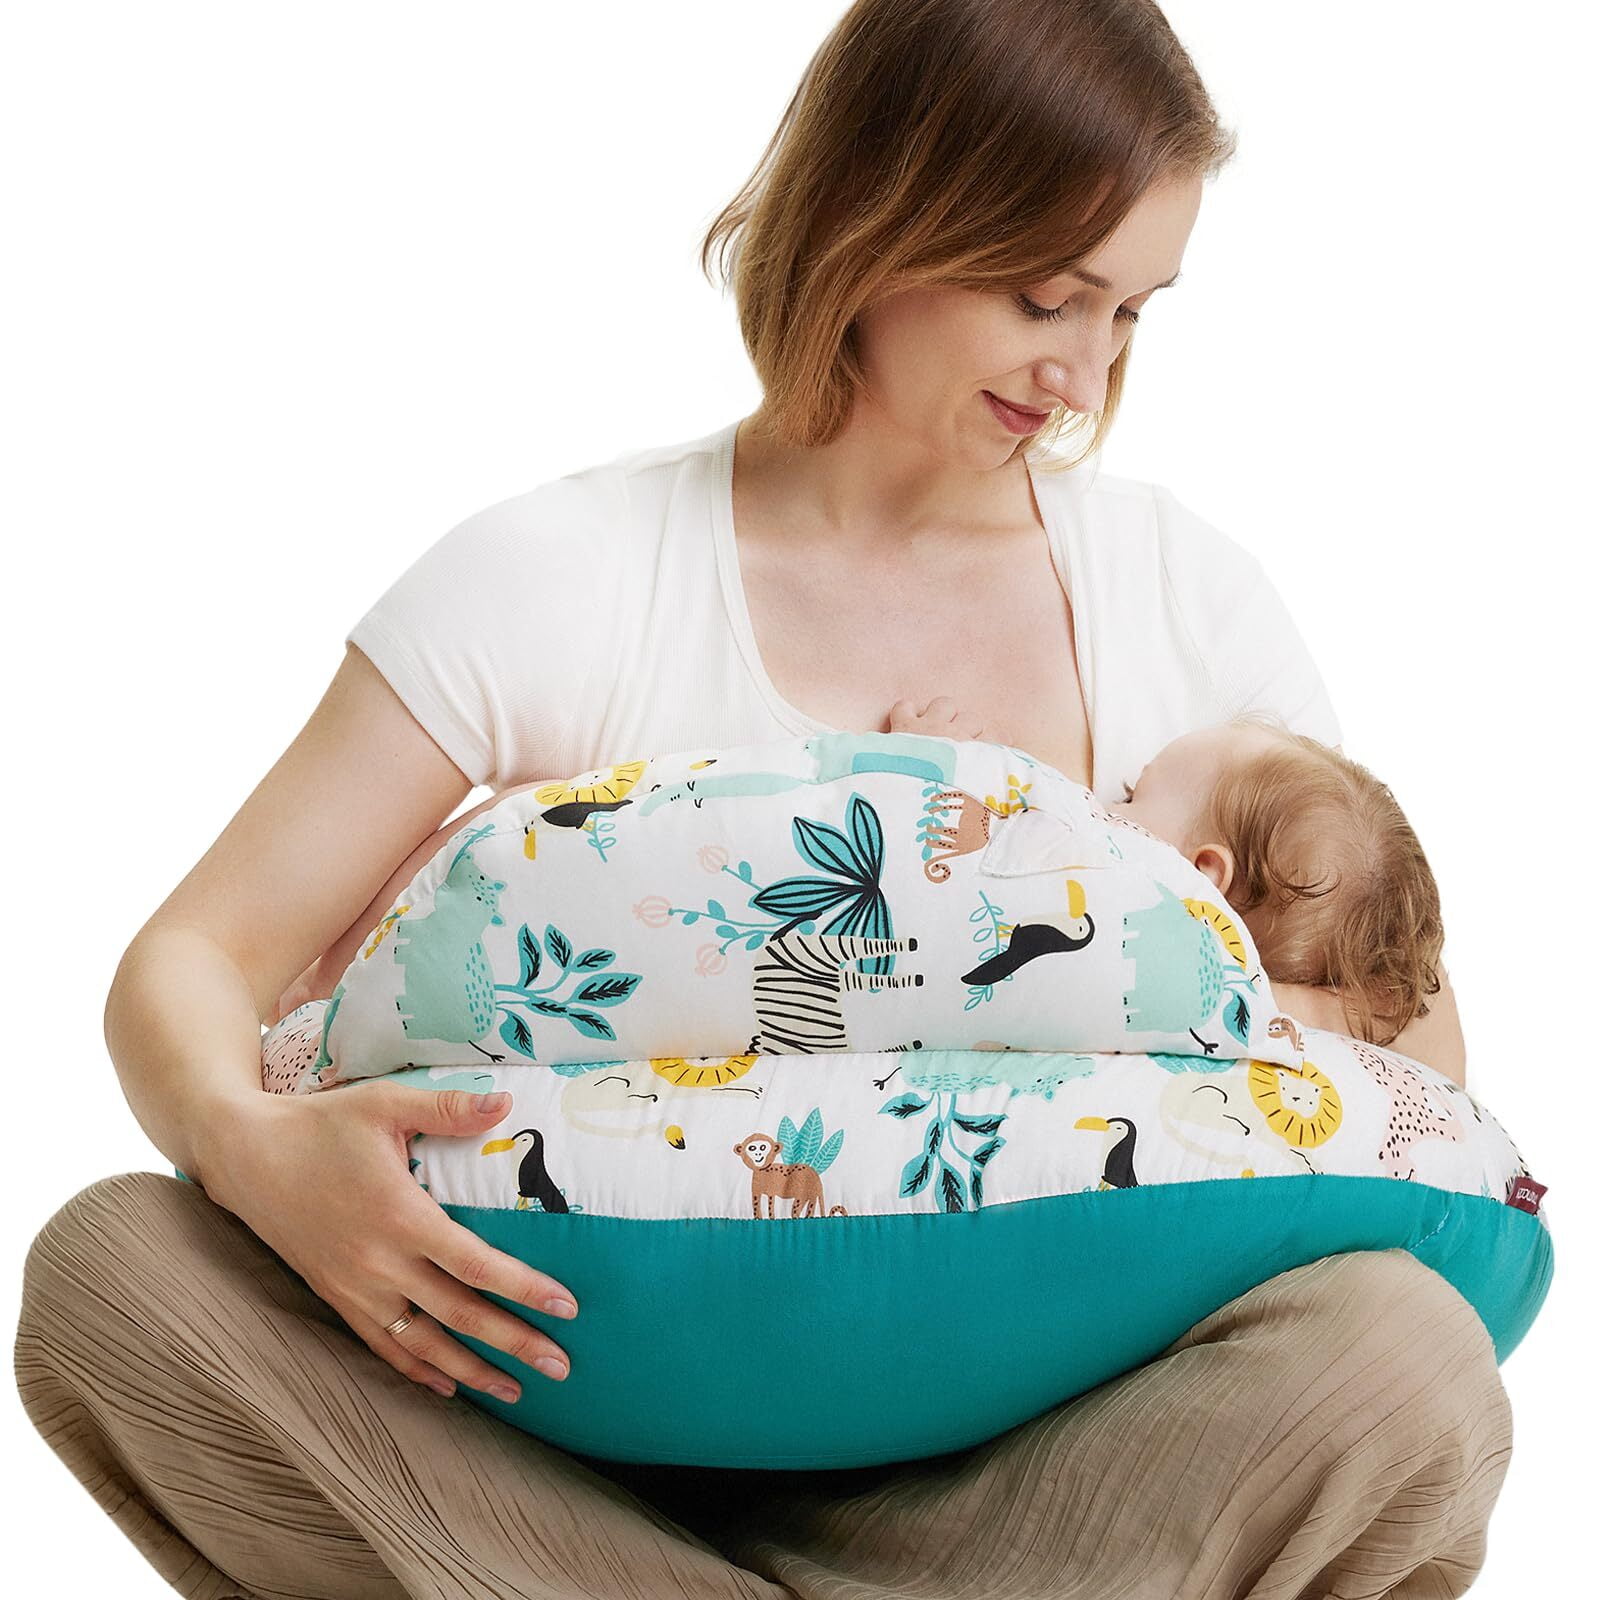 Best nursing pillows: 9 top-rated options for breastfeeding